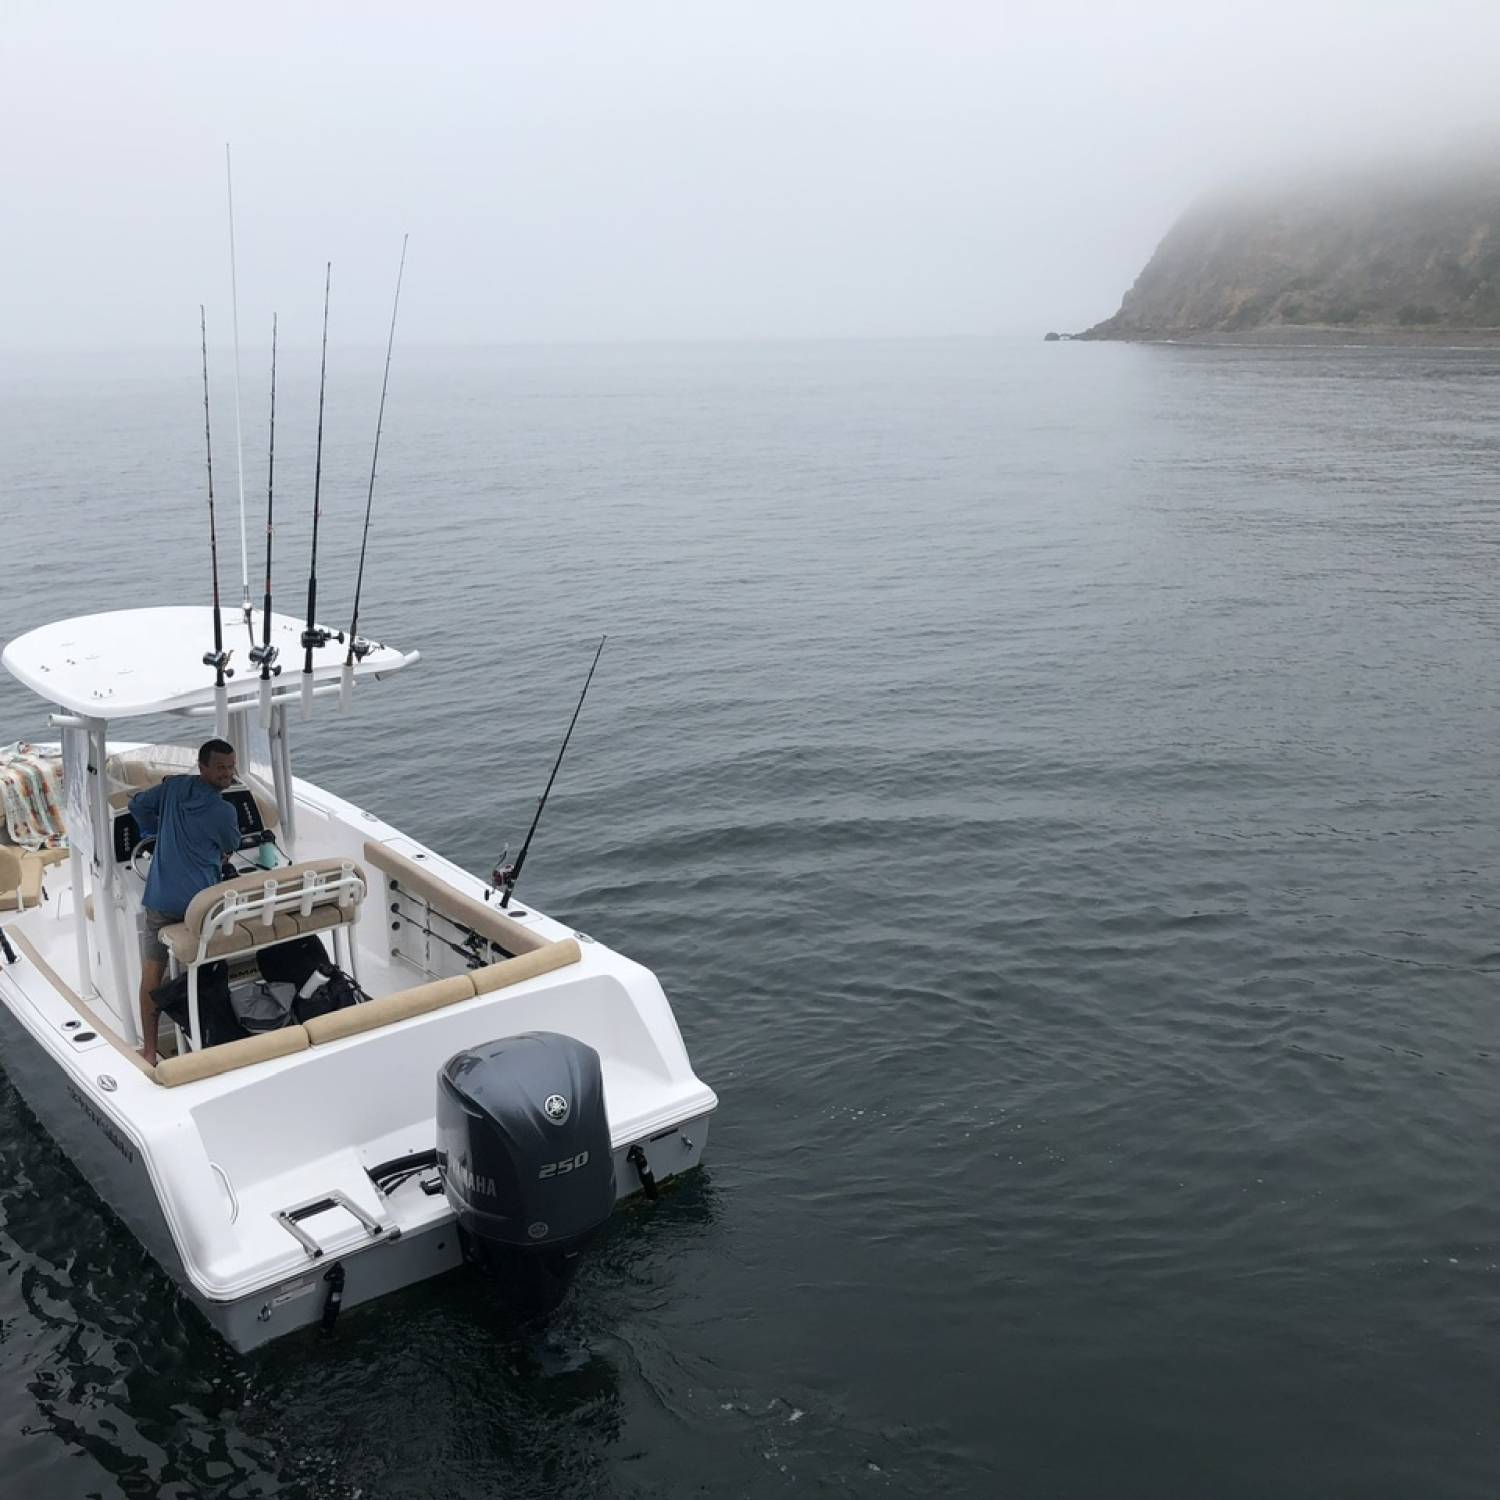 Solo trip out to Santa Cruz Island for a day of halibut fishing